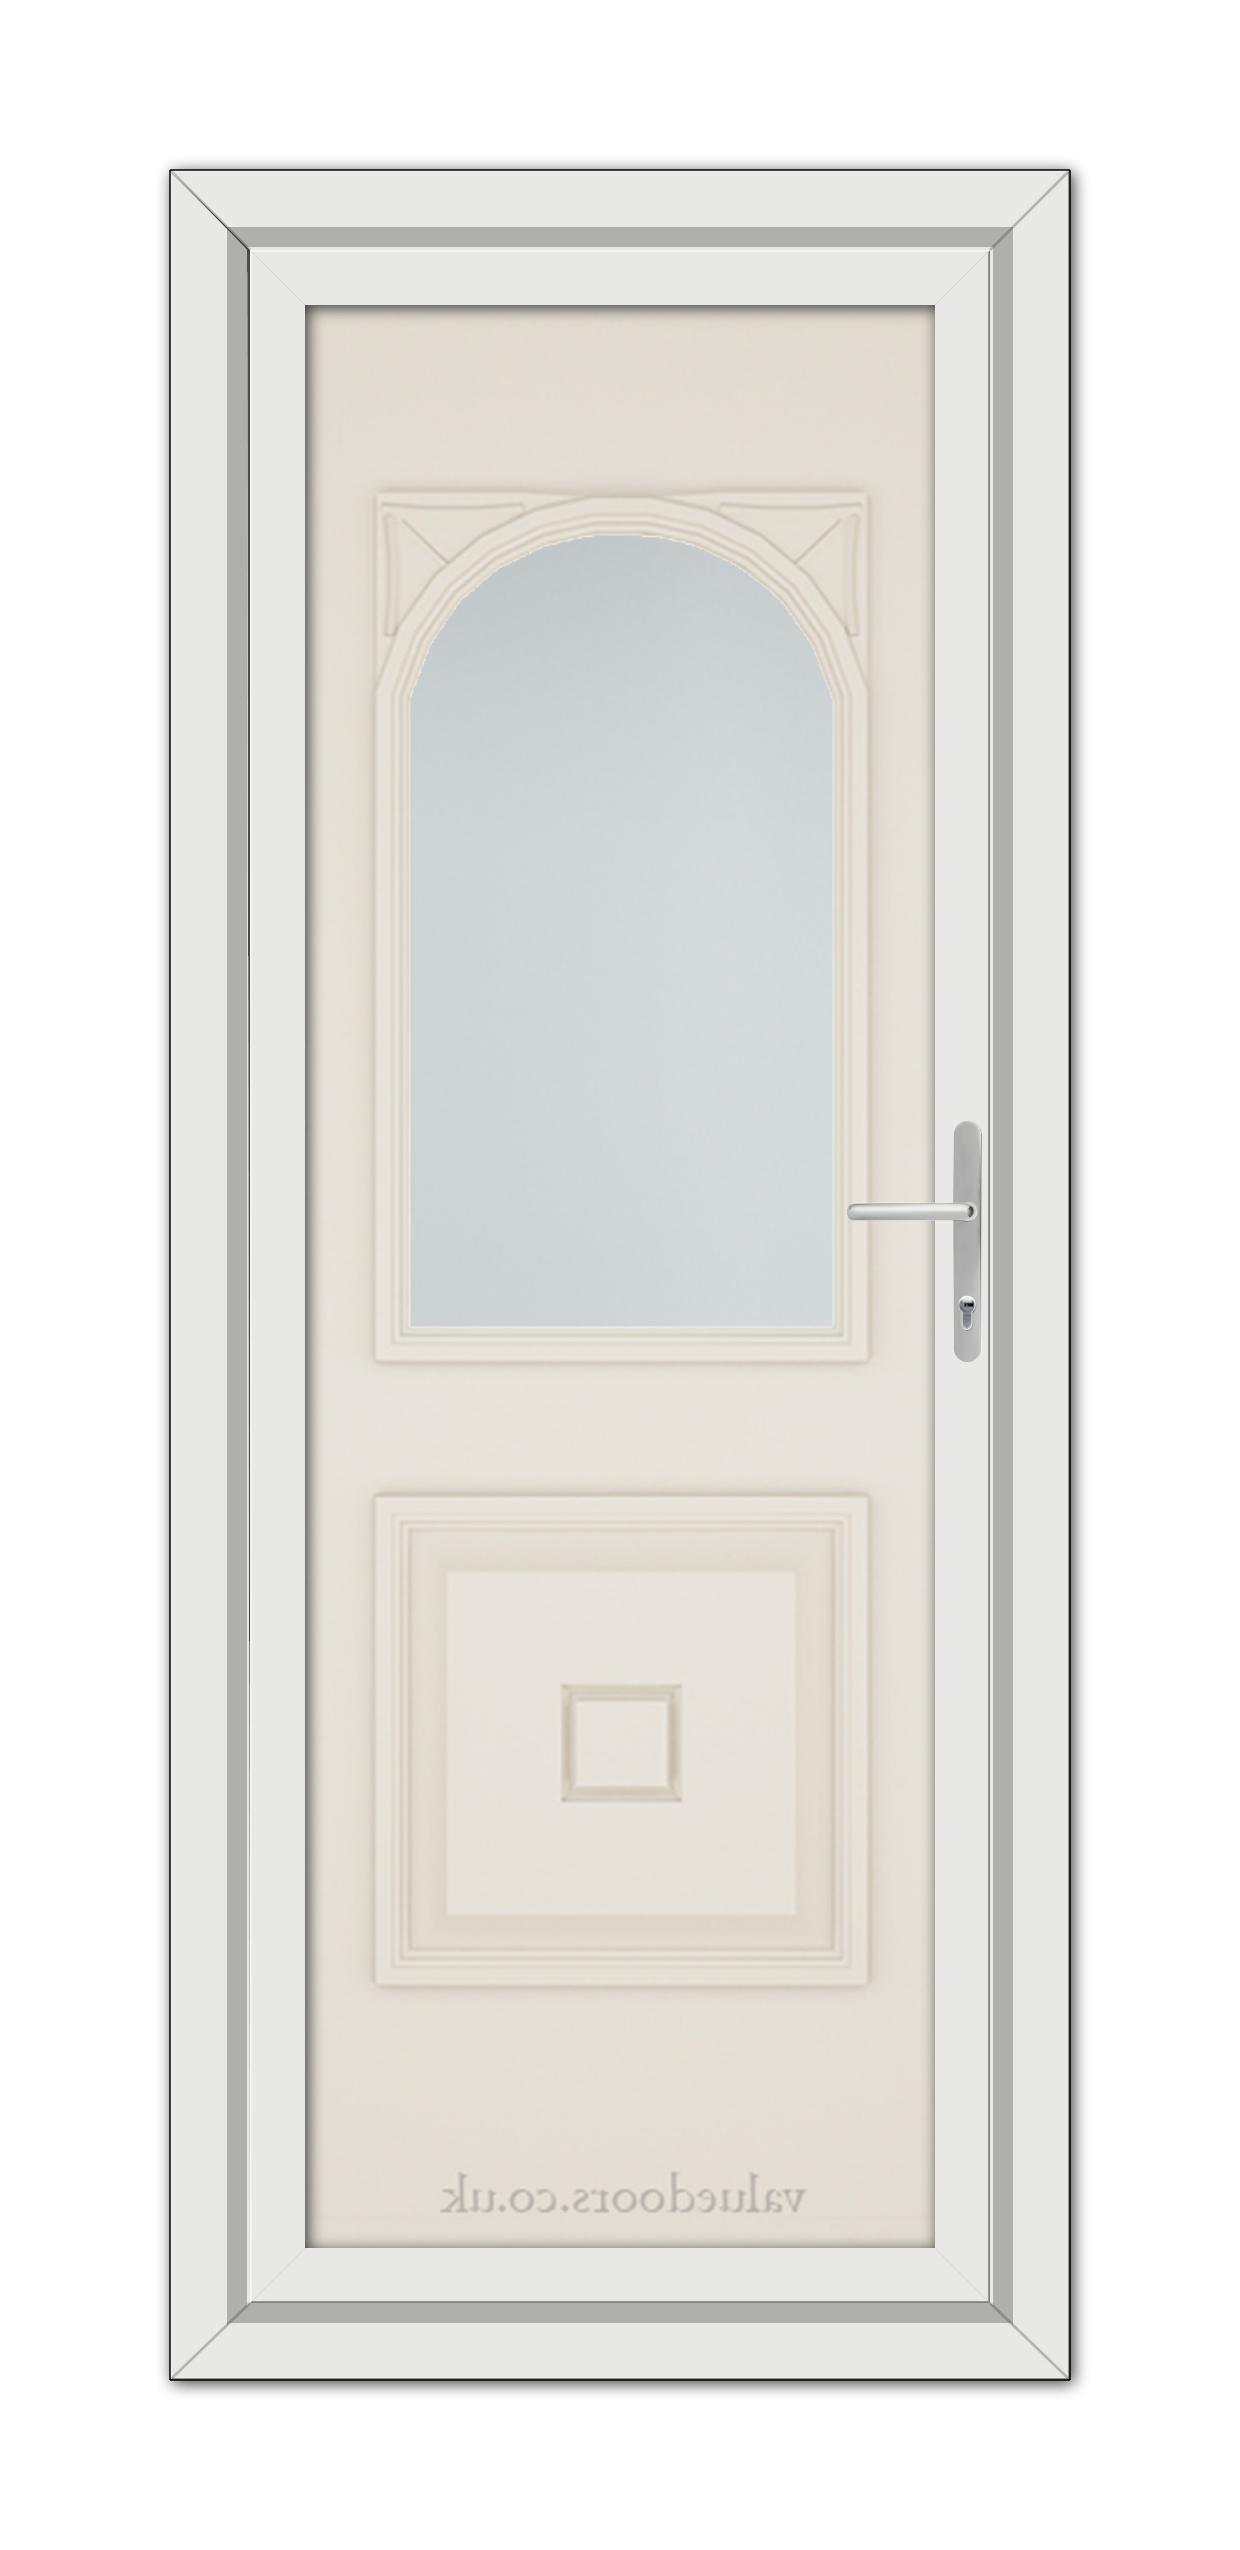 A modern Cream Reims uPVC door featuring a square panel, arched window, and a silver handle, set within a simple white frame.